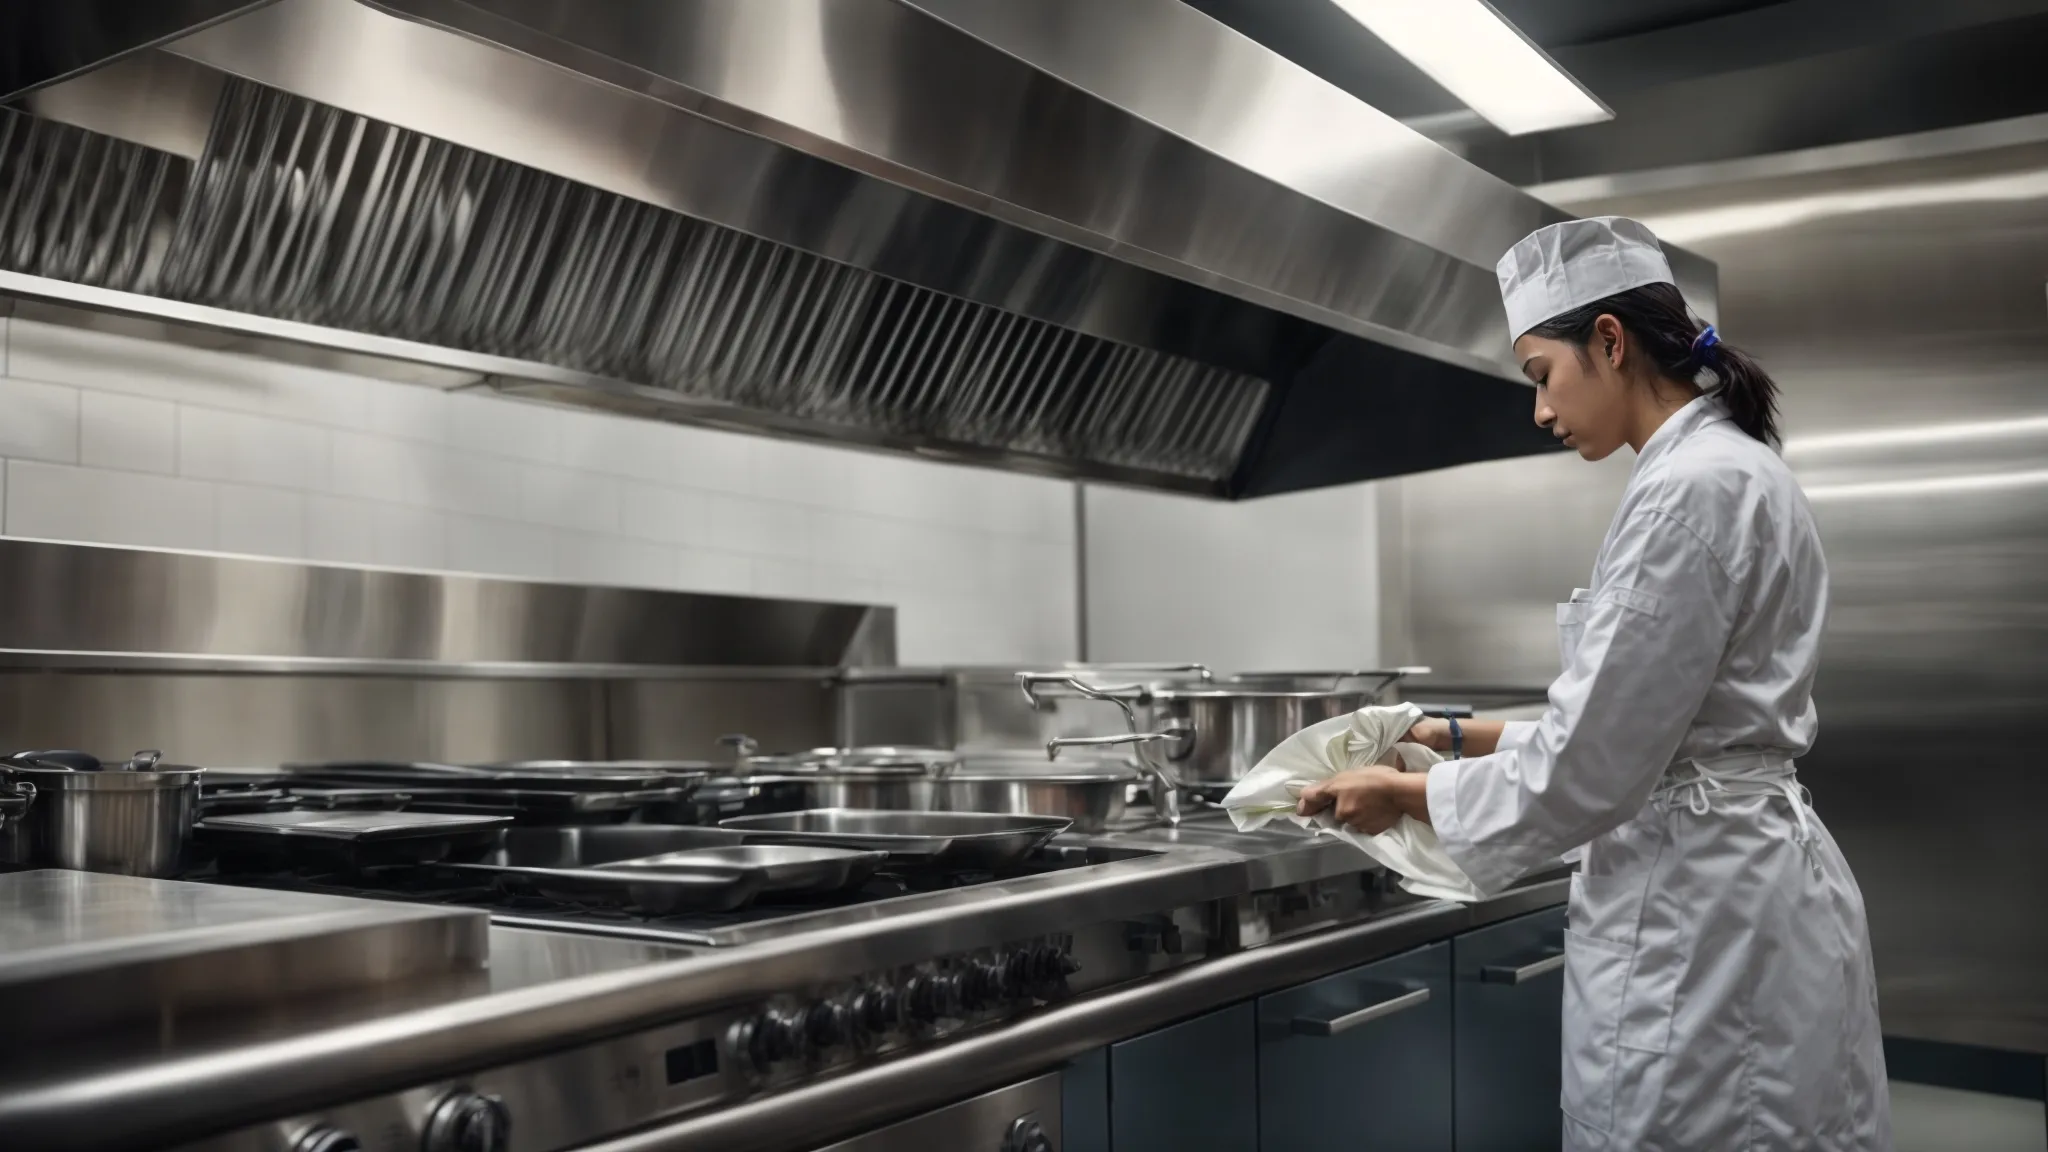 a professional kitchen staff member cleans a large stainless steel kitchen hood, illustrating commitment to cleanliness and health standards.